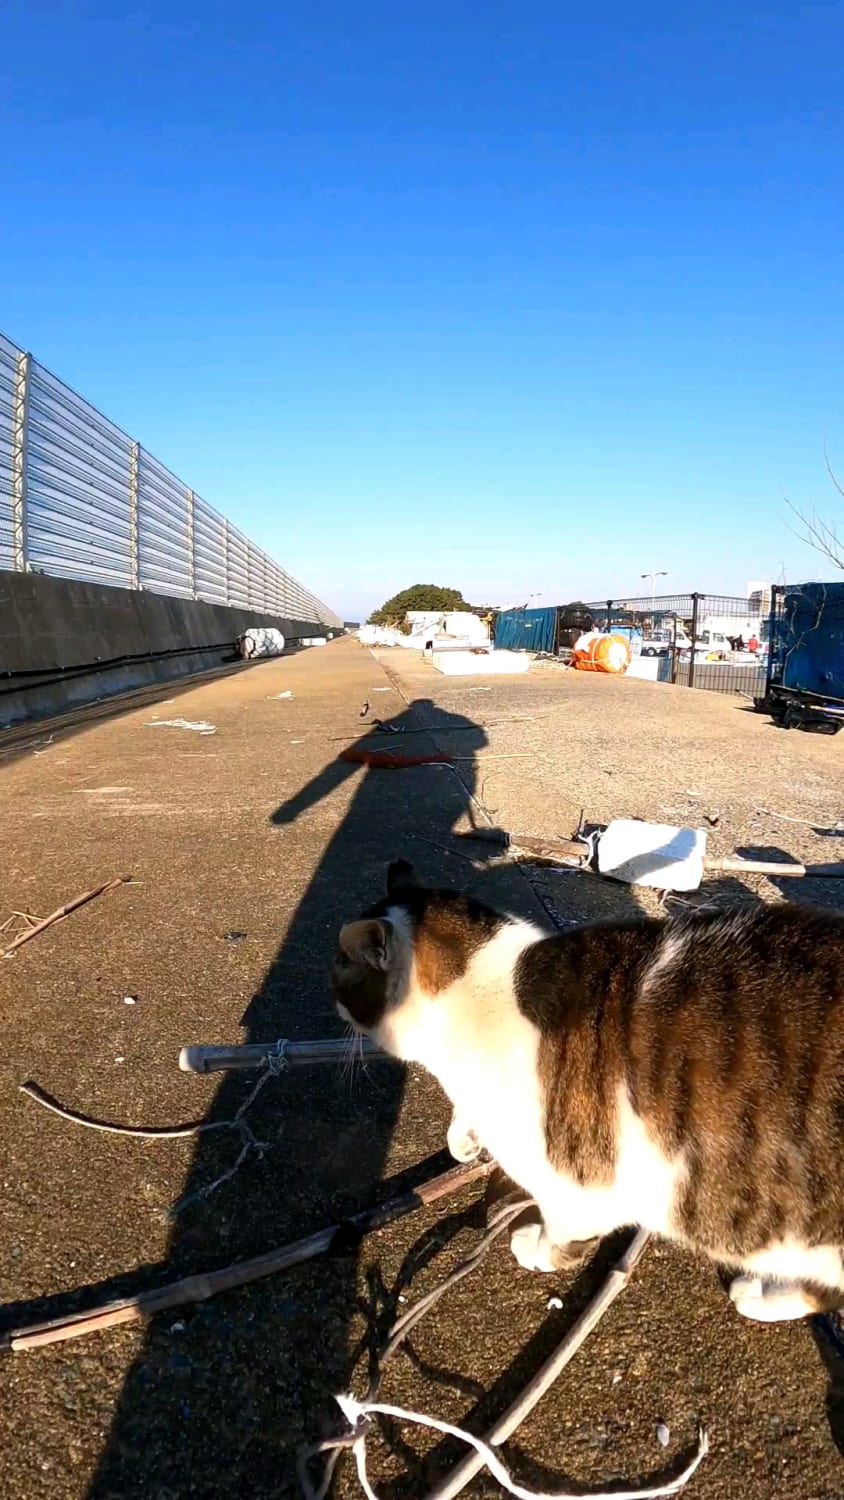 It's fun to walk around the fishing port with stray cats